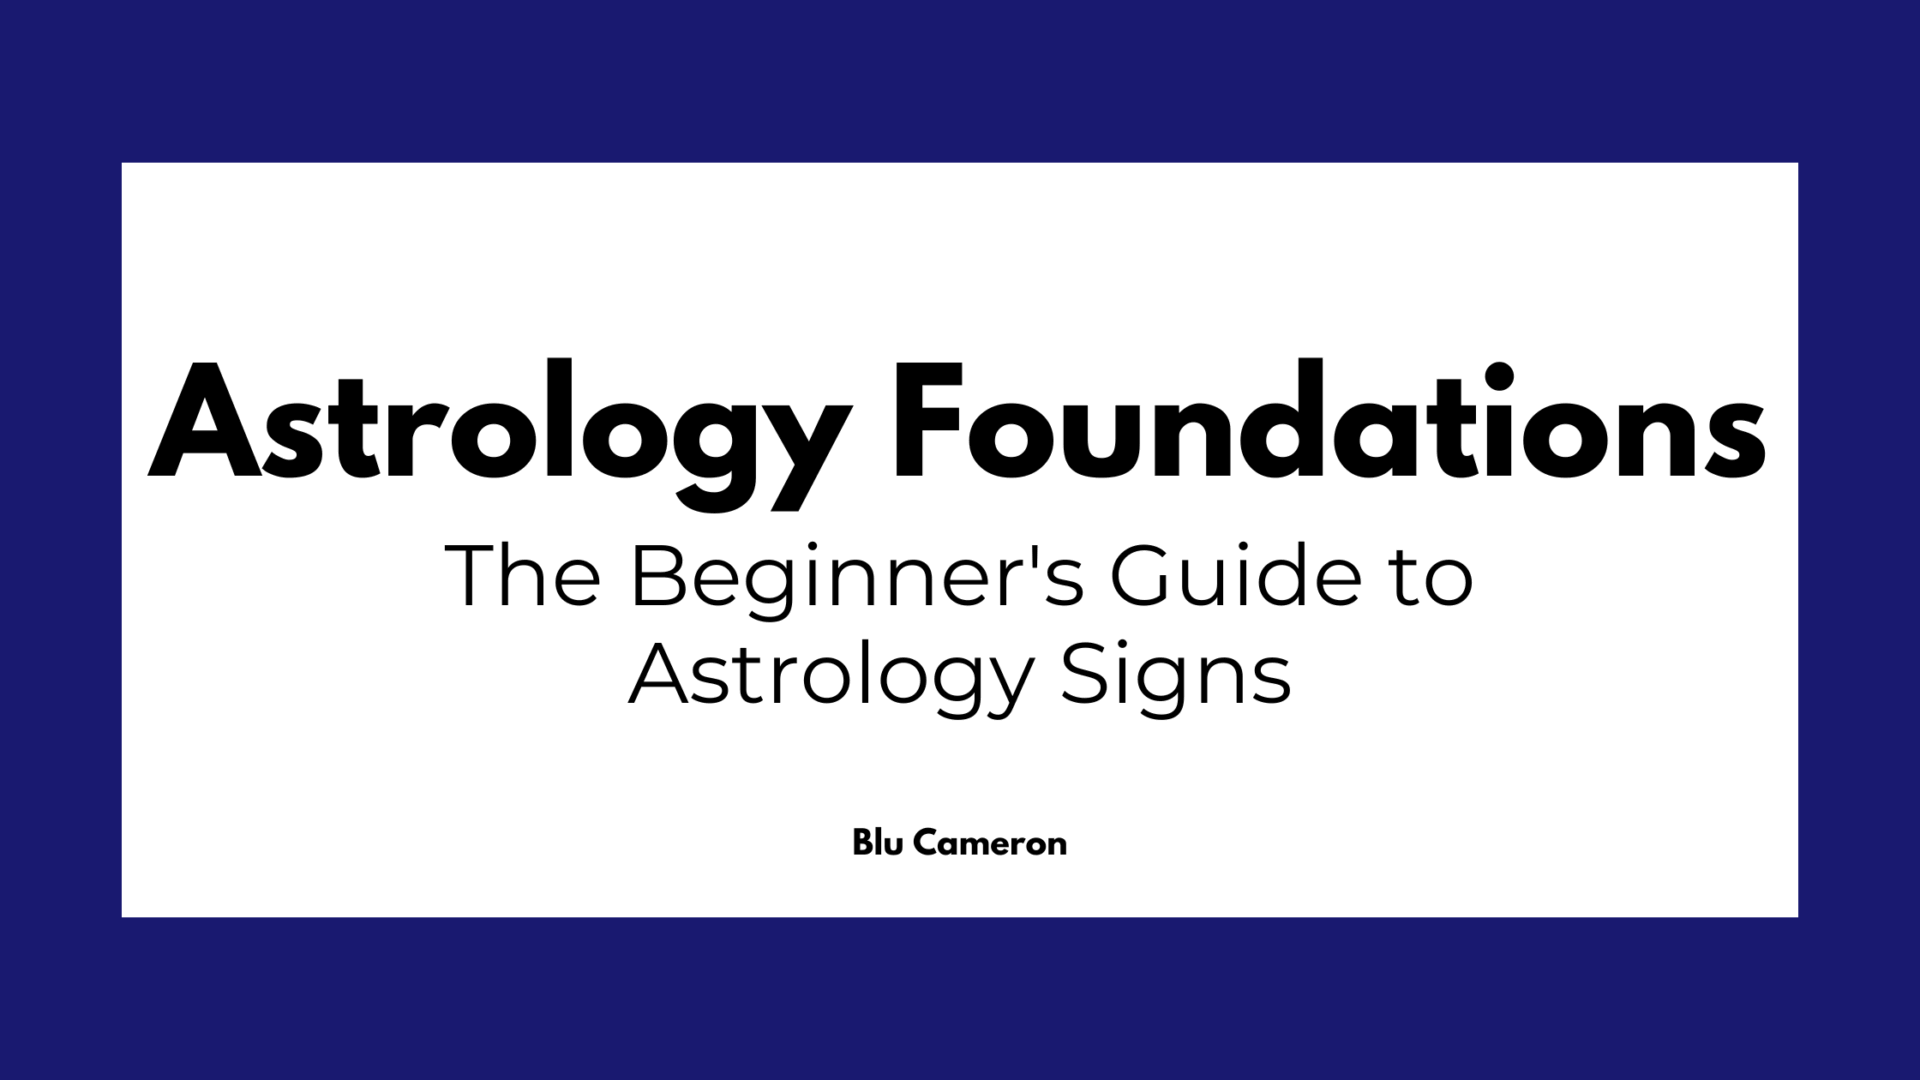 Black text against a white and purple background reads: "Astrology Foundations: The Beginner's Guide to Astrology Signs, Blu Cameron"